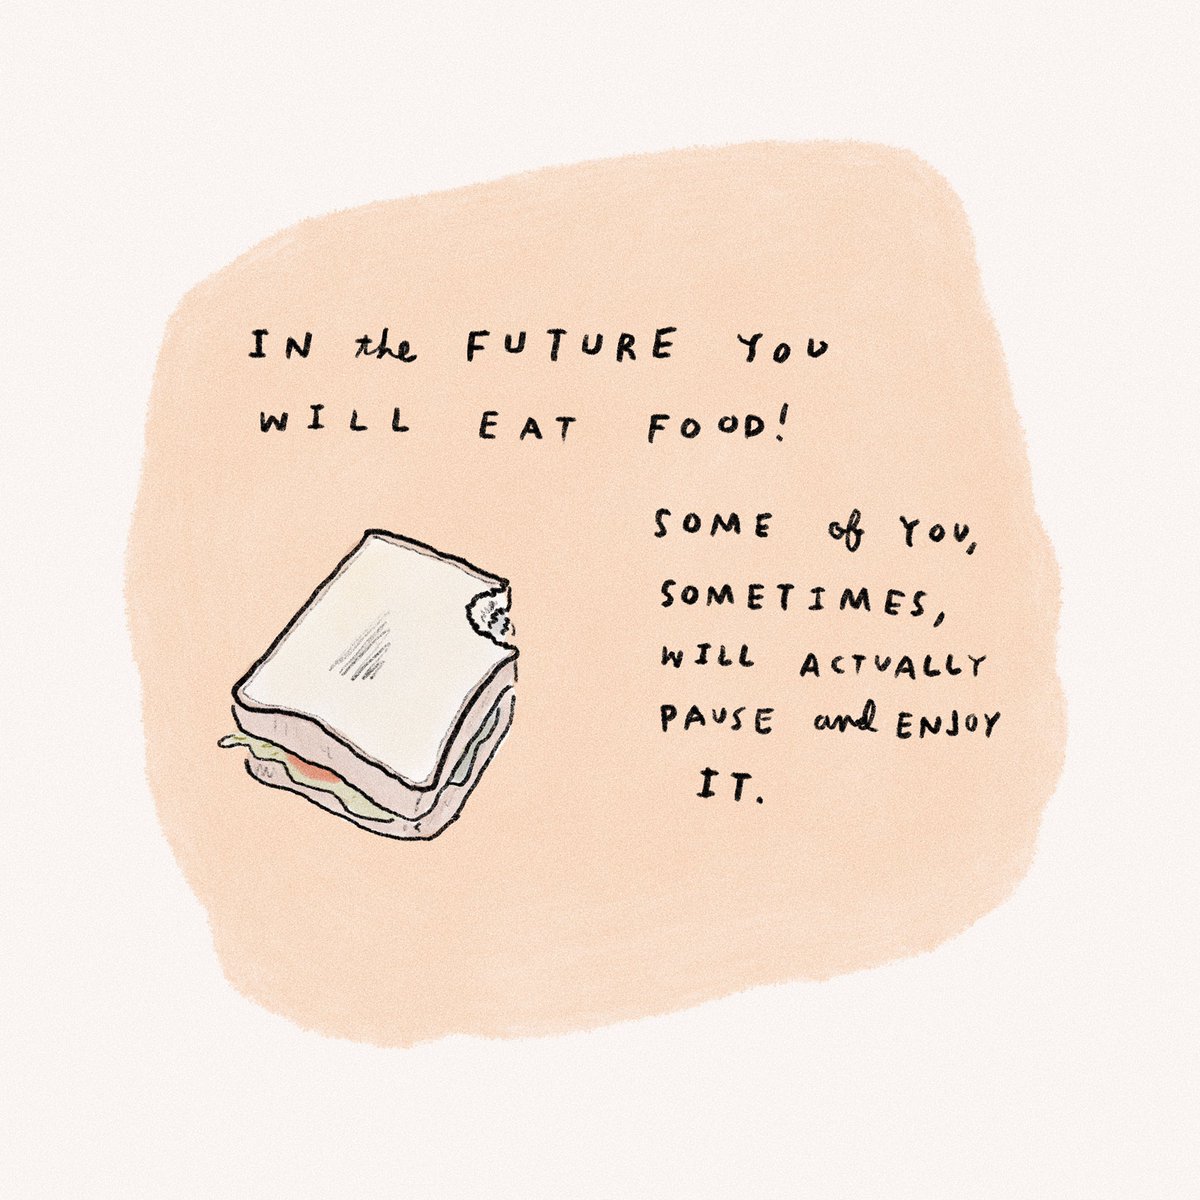 In the future you will eat food!Some of you, sometimes, will actually pause and enjoy it.